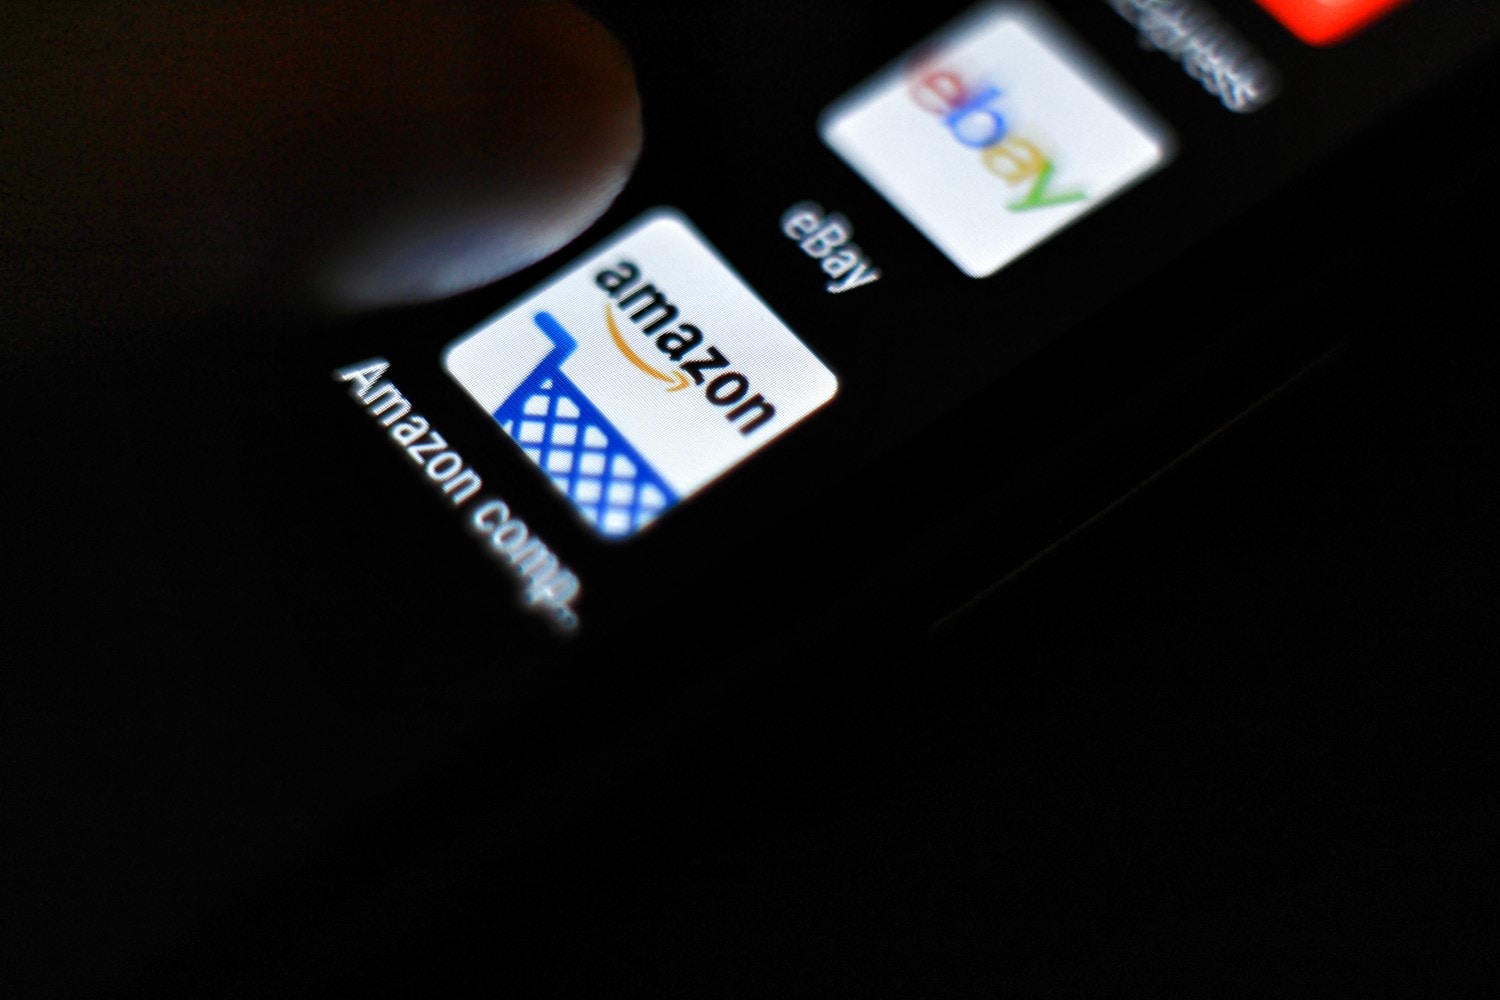 A dark smartphone screen displays the eBay app stacked above the Amazon app. A finger hovers next to the Amazon app